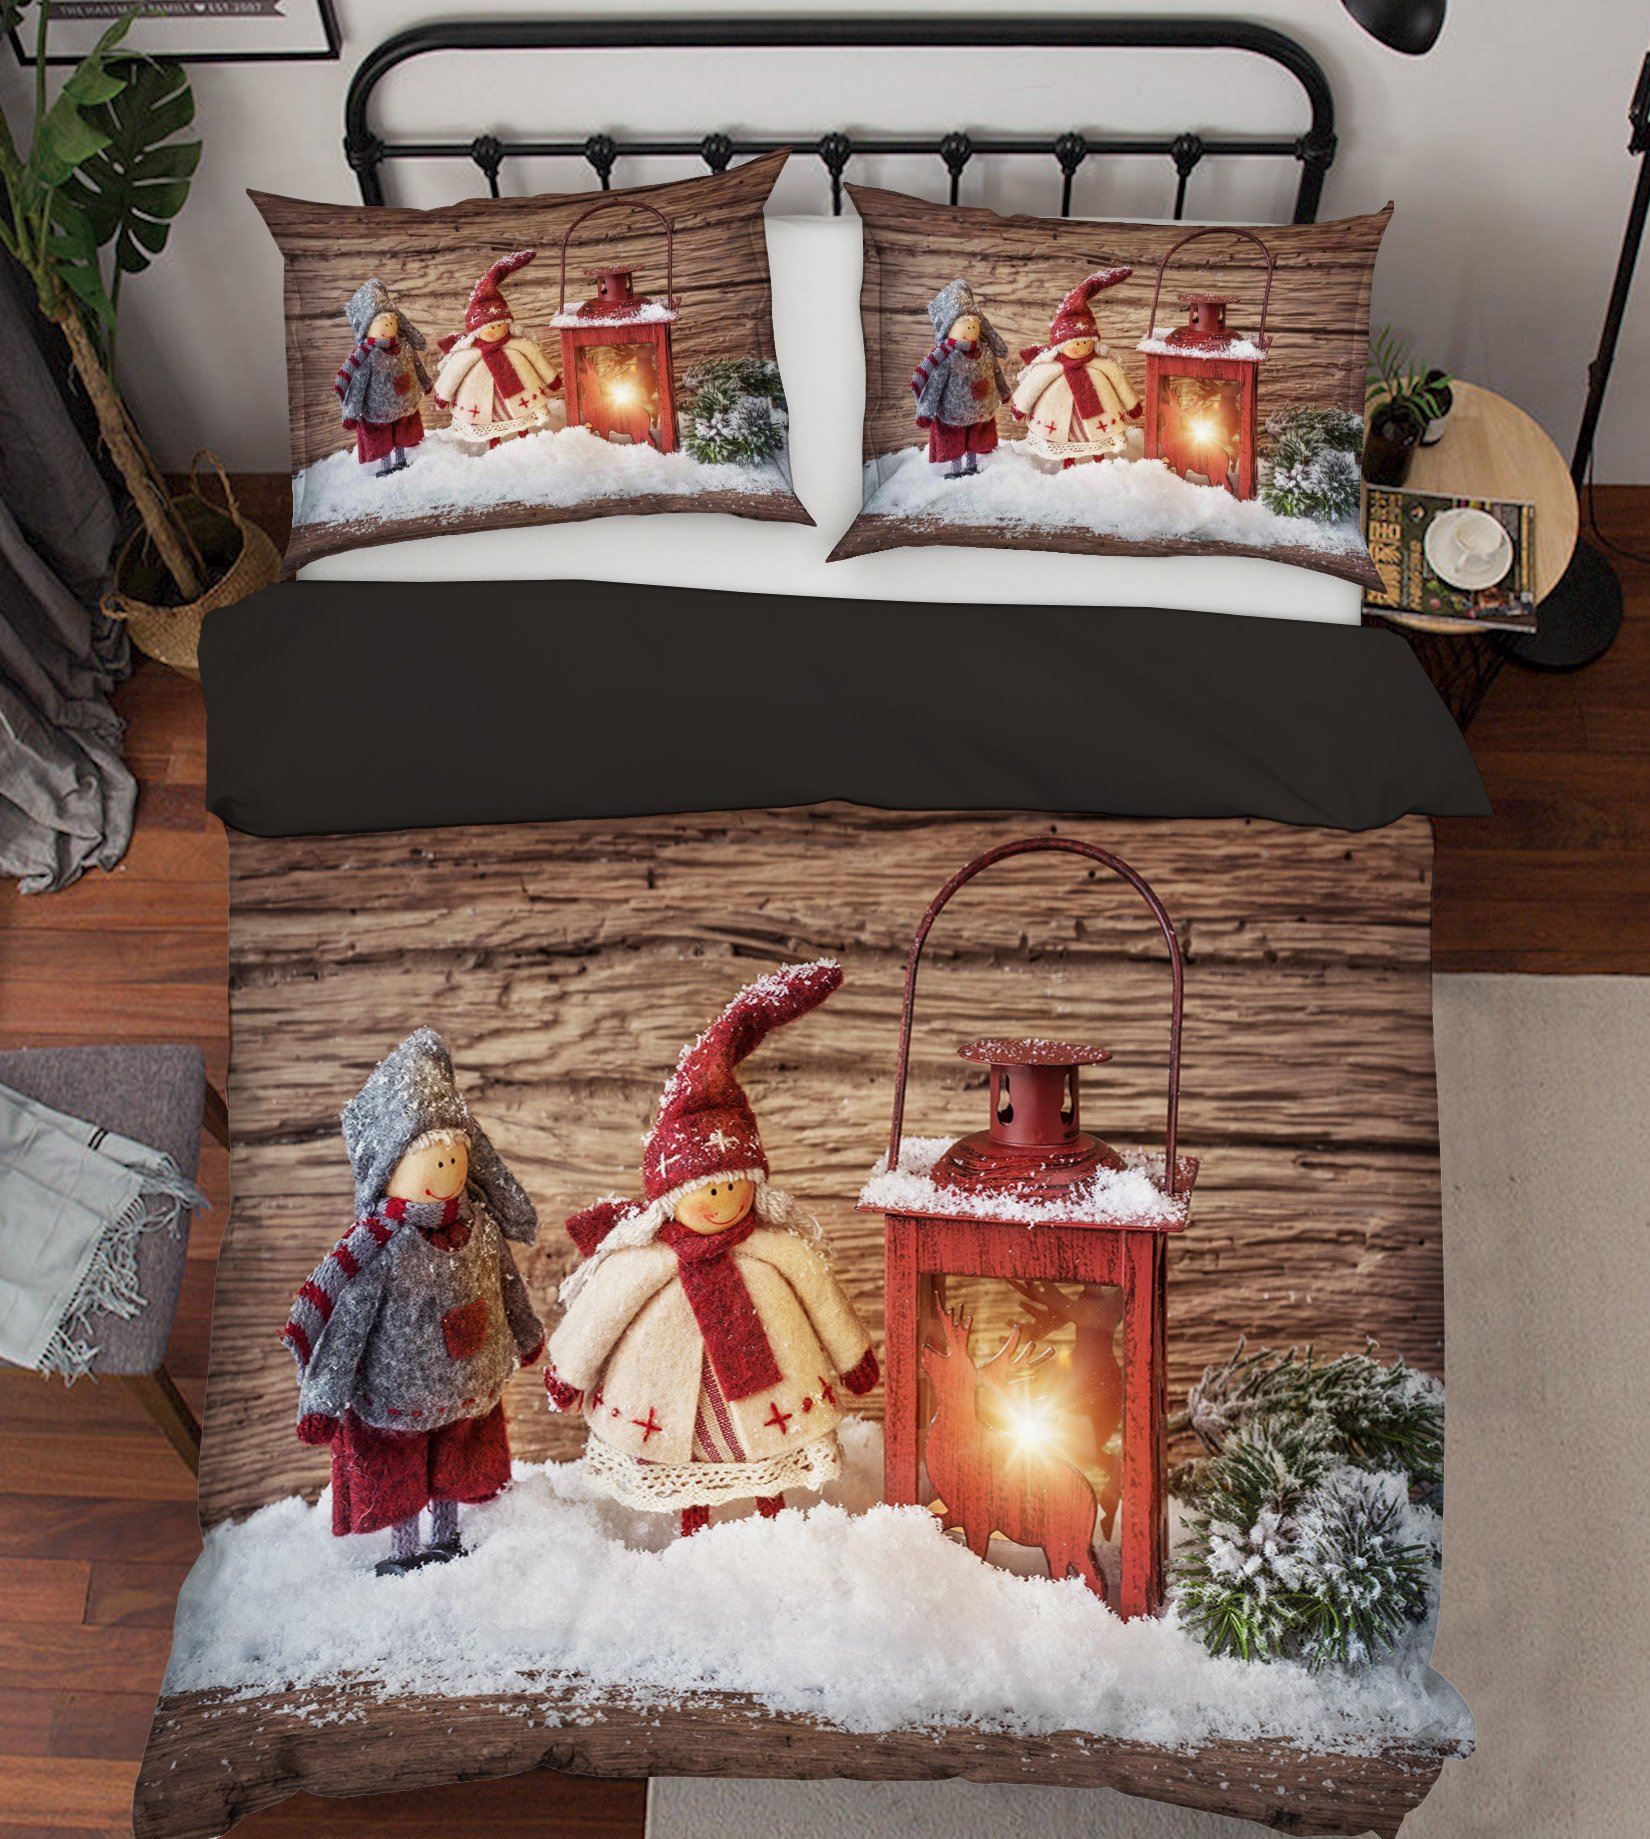 3D Christmas Doll Oil Lamp 11 Bed Pillowcases Quilt Quiet Covers AJ Creativity Home 